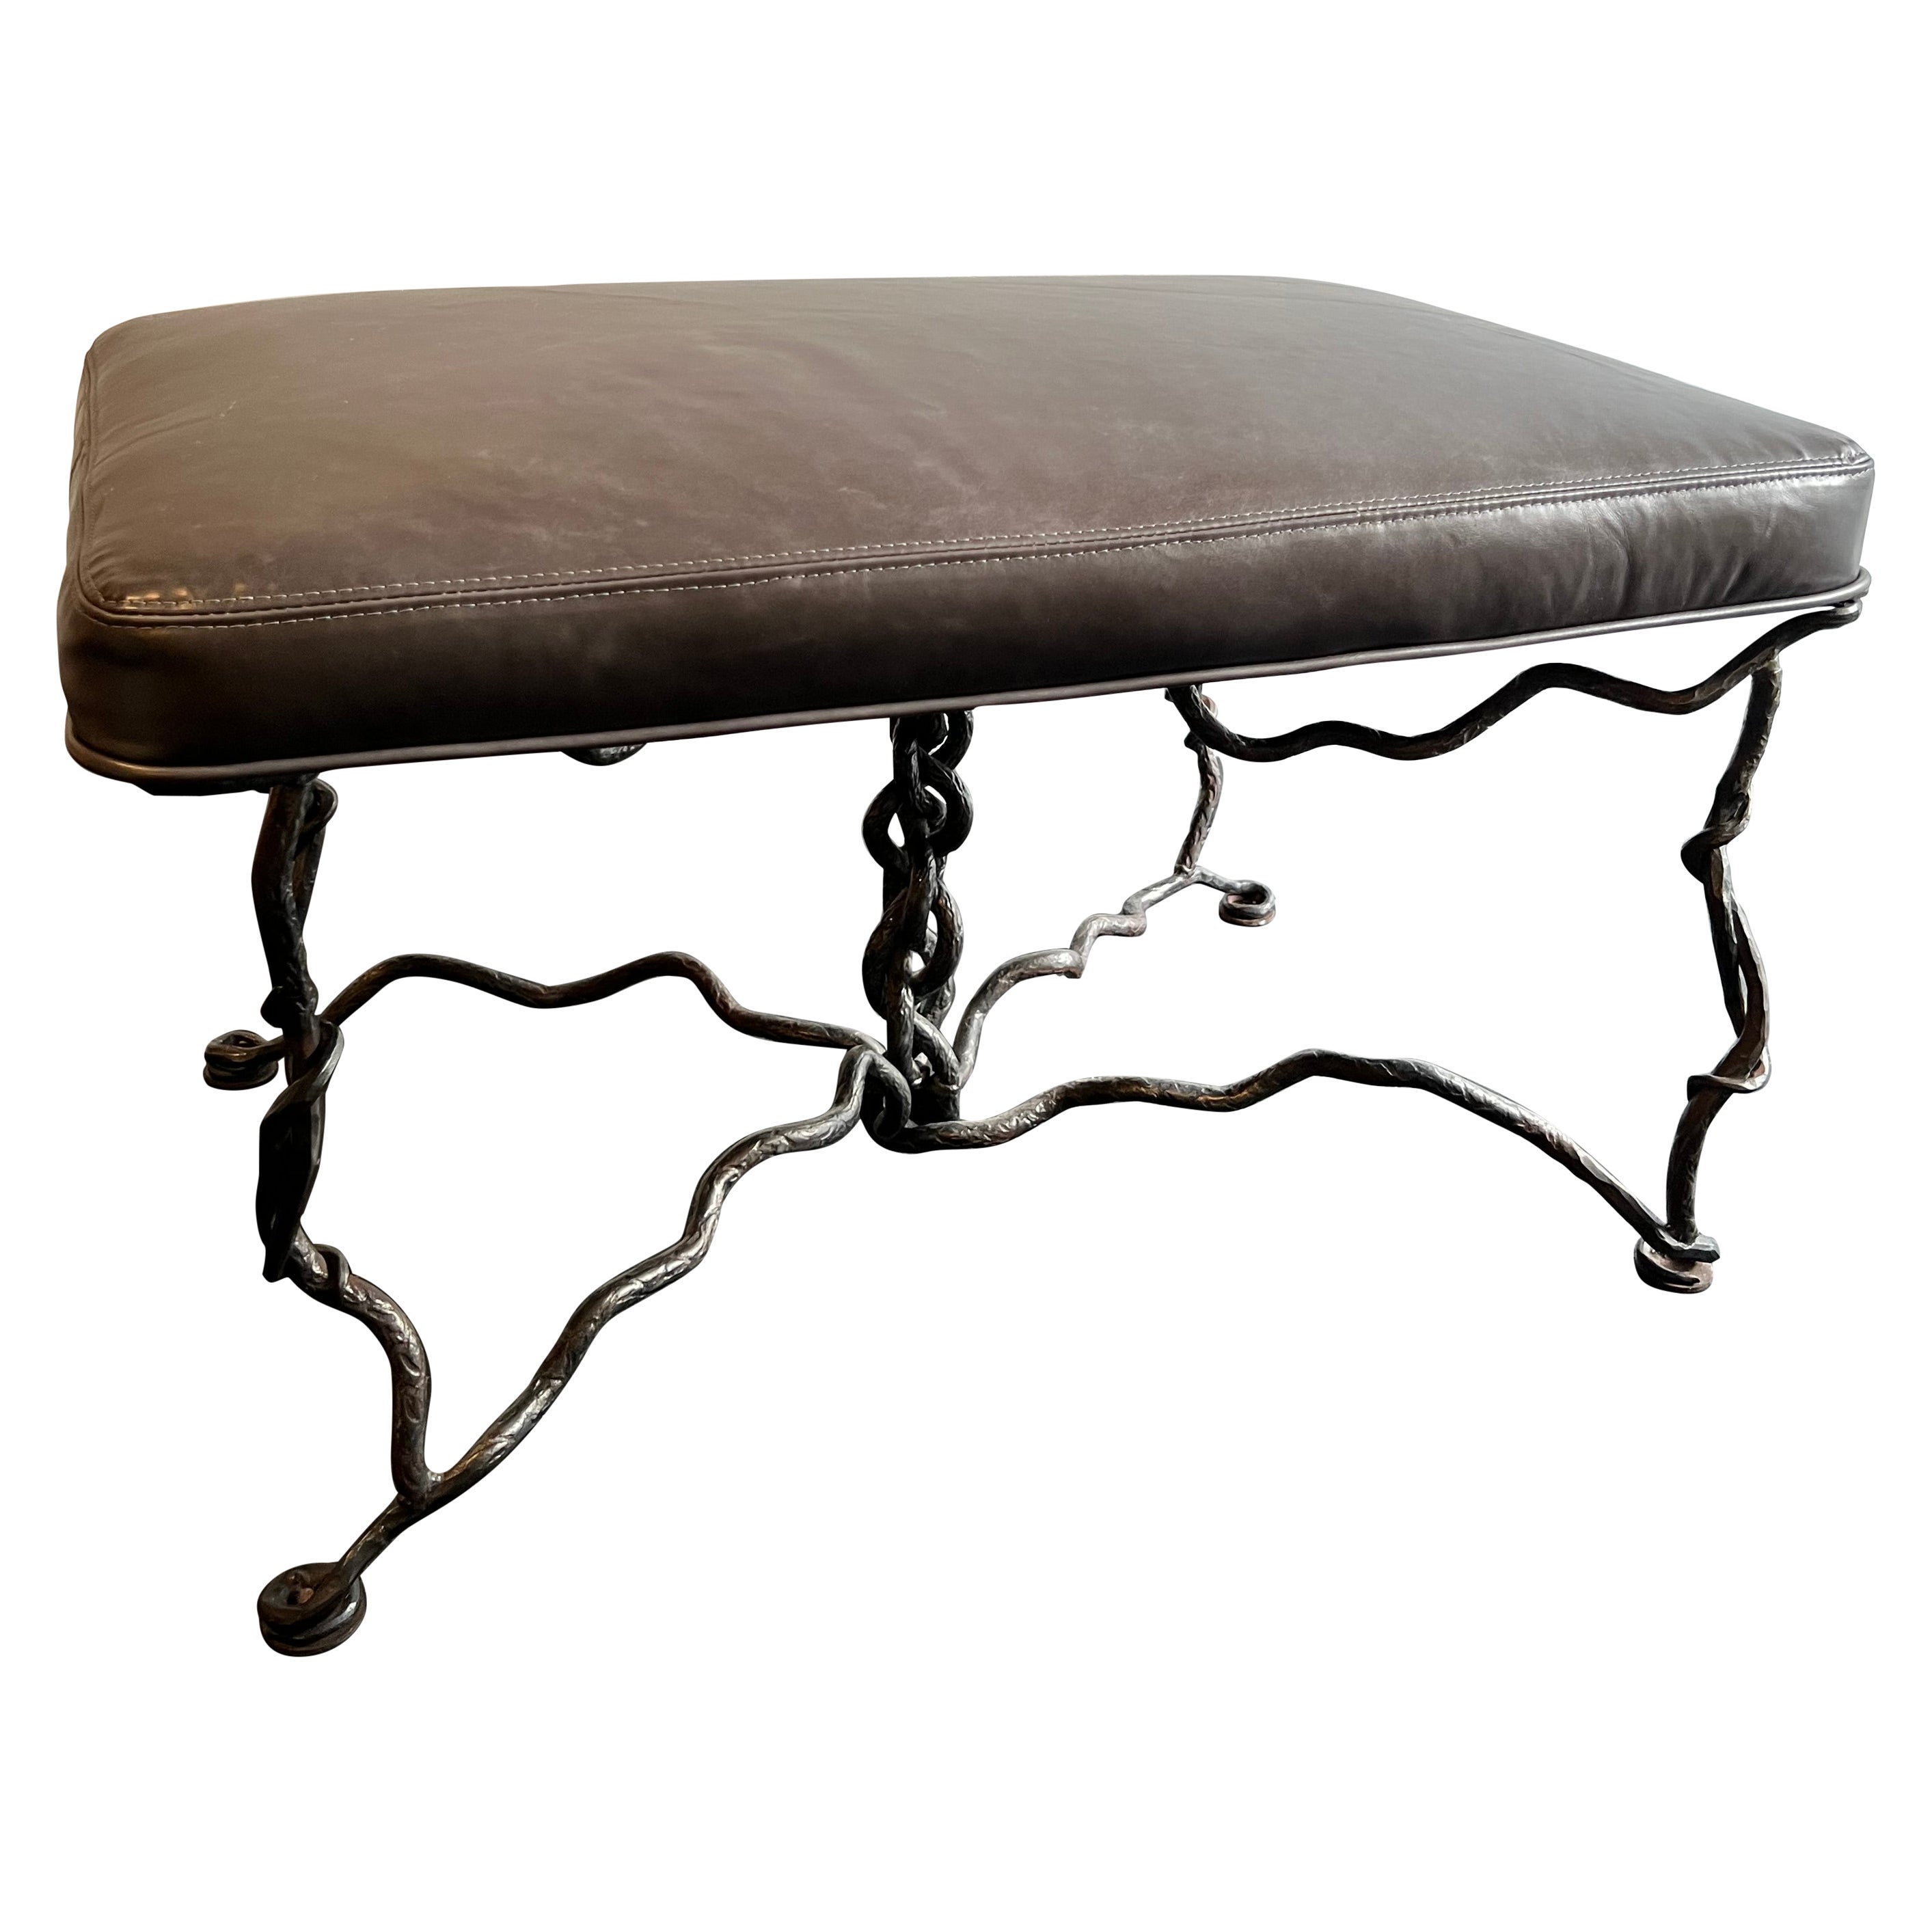 Giacometti Style Brutalist Iron Bench In Leather  For Sale